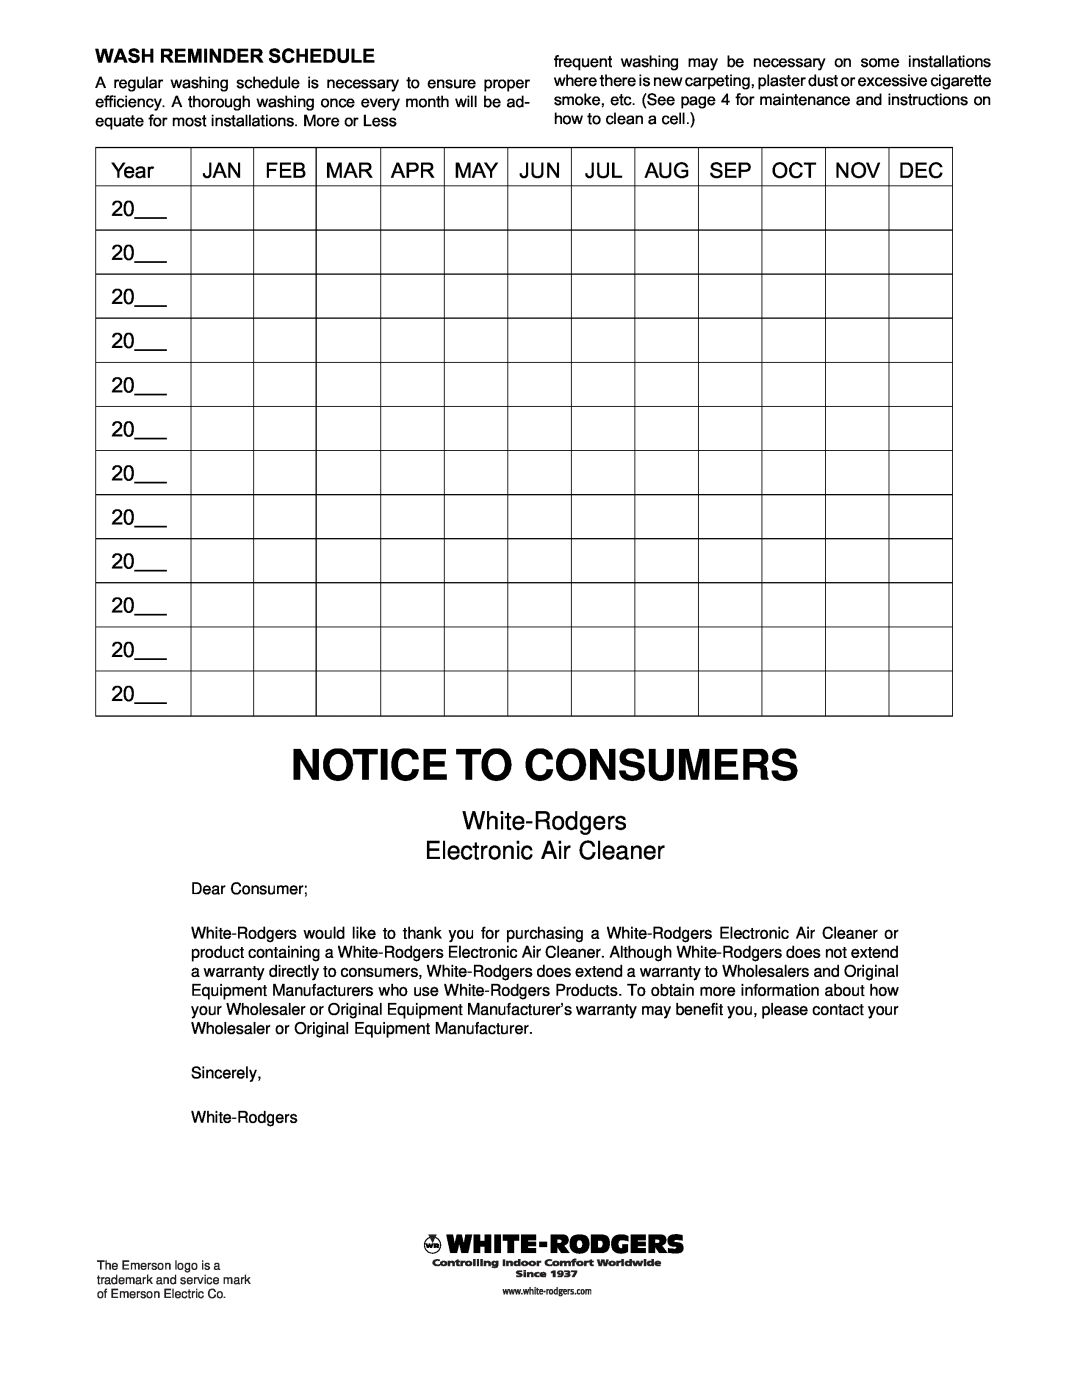 White Rodgers CSC1000 owner manual Notice To Consumers, White-Rodgers Electronic Air Cleaner 